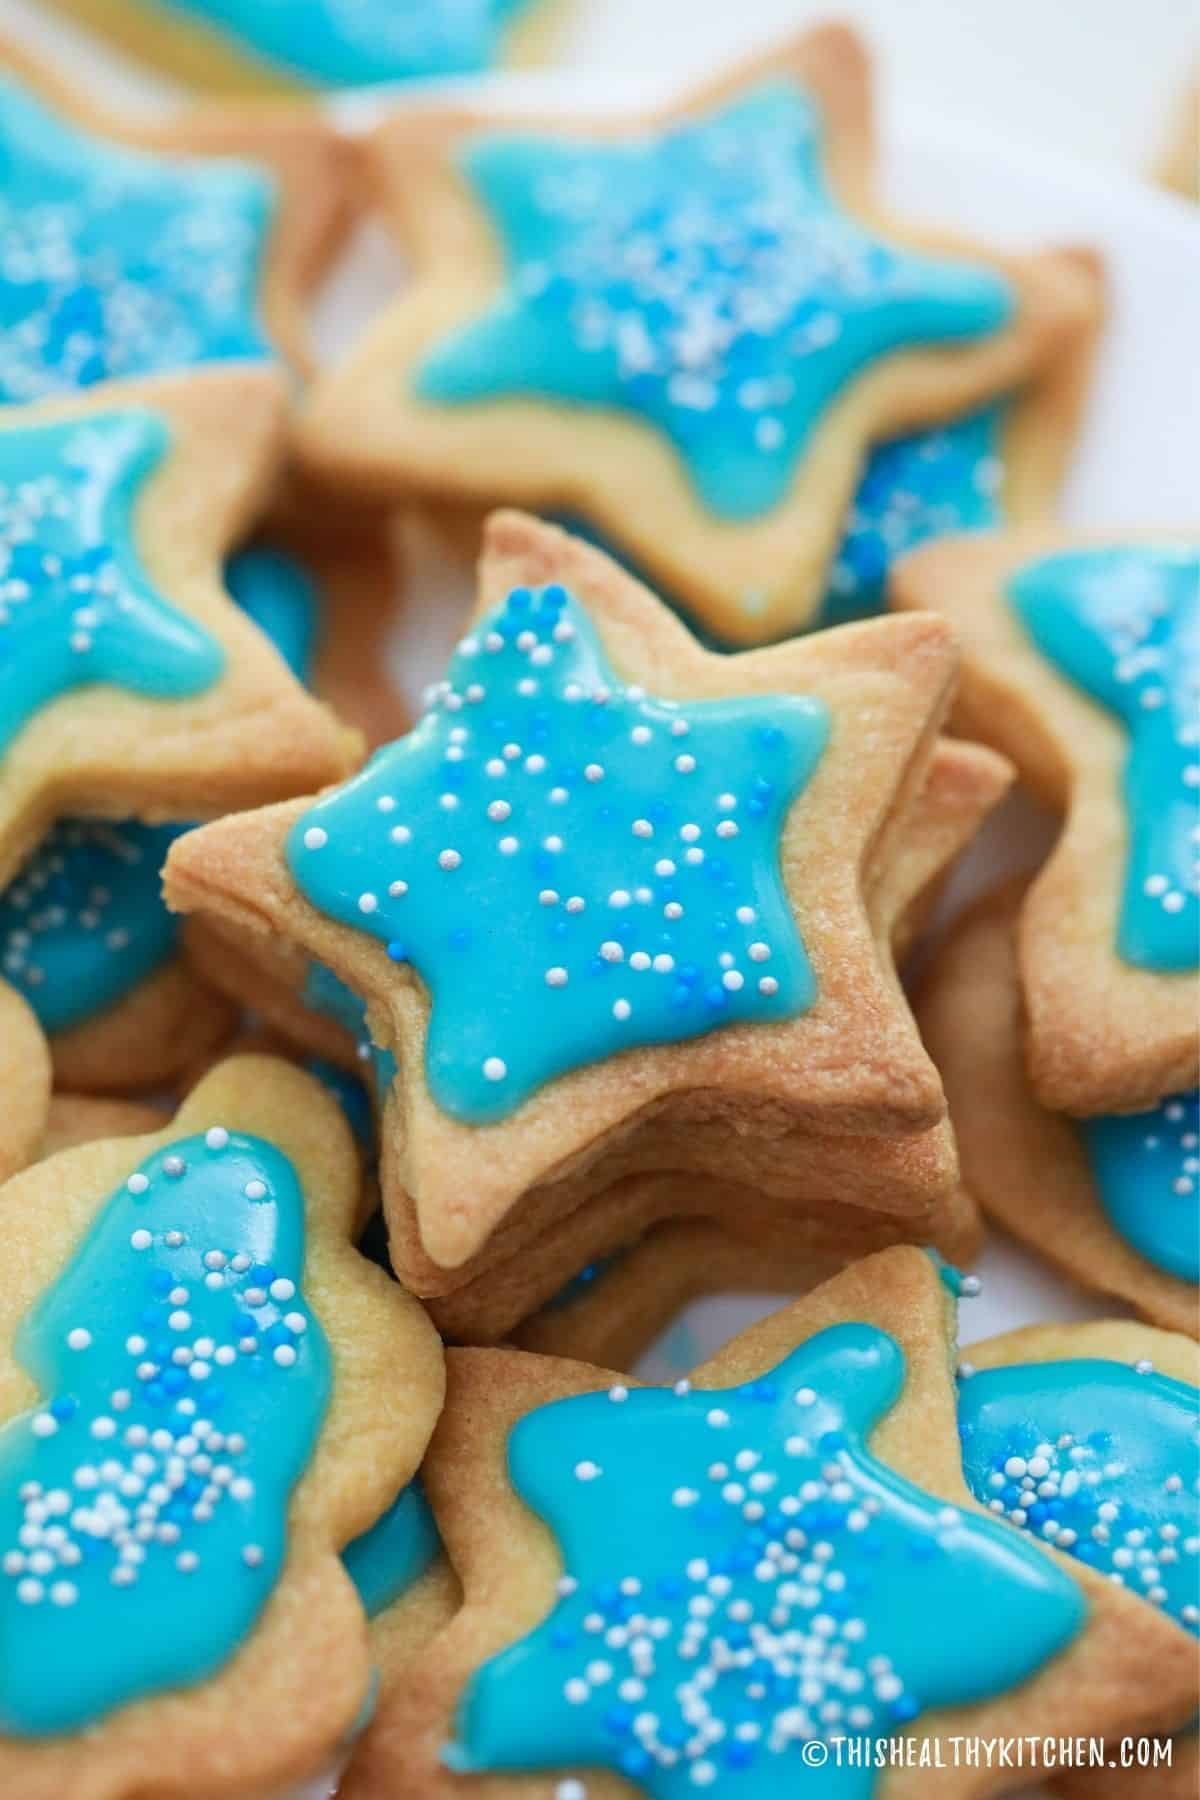 Stacks of star shaped shortbread cookies with blue icing and sprinkles on top.